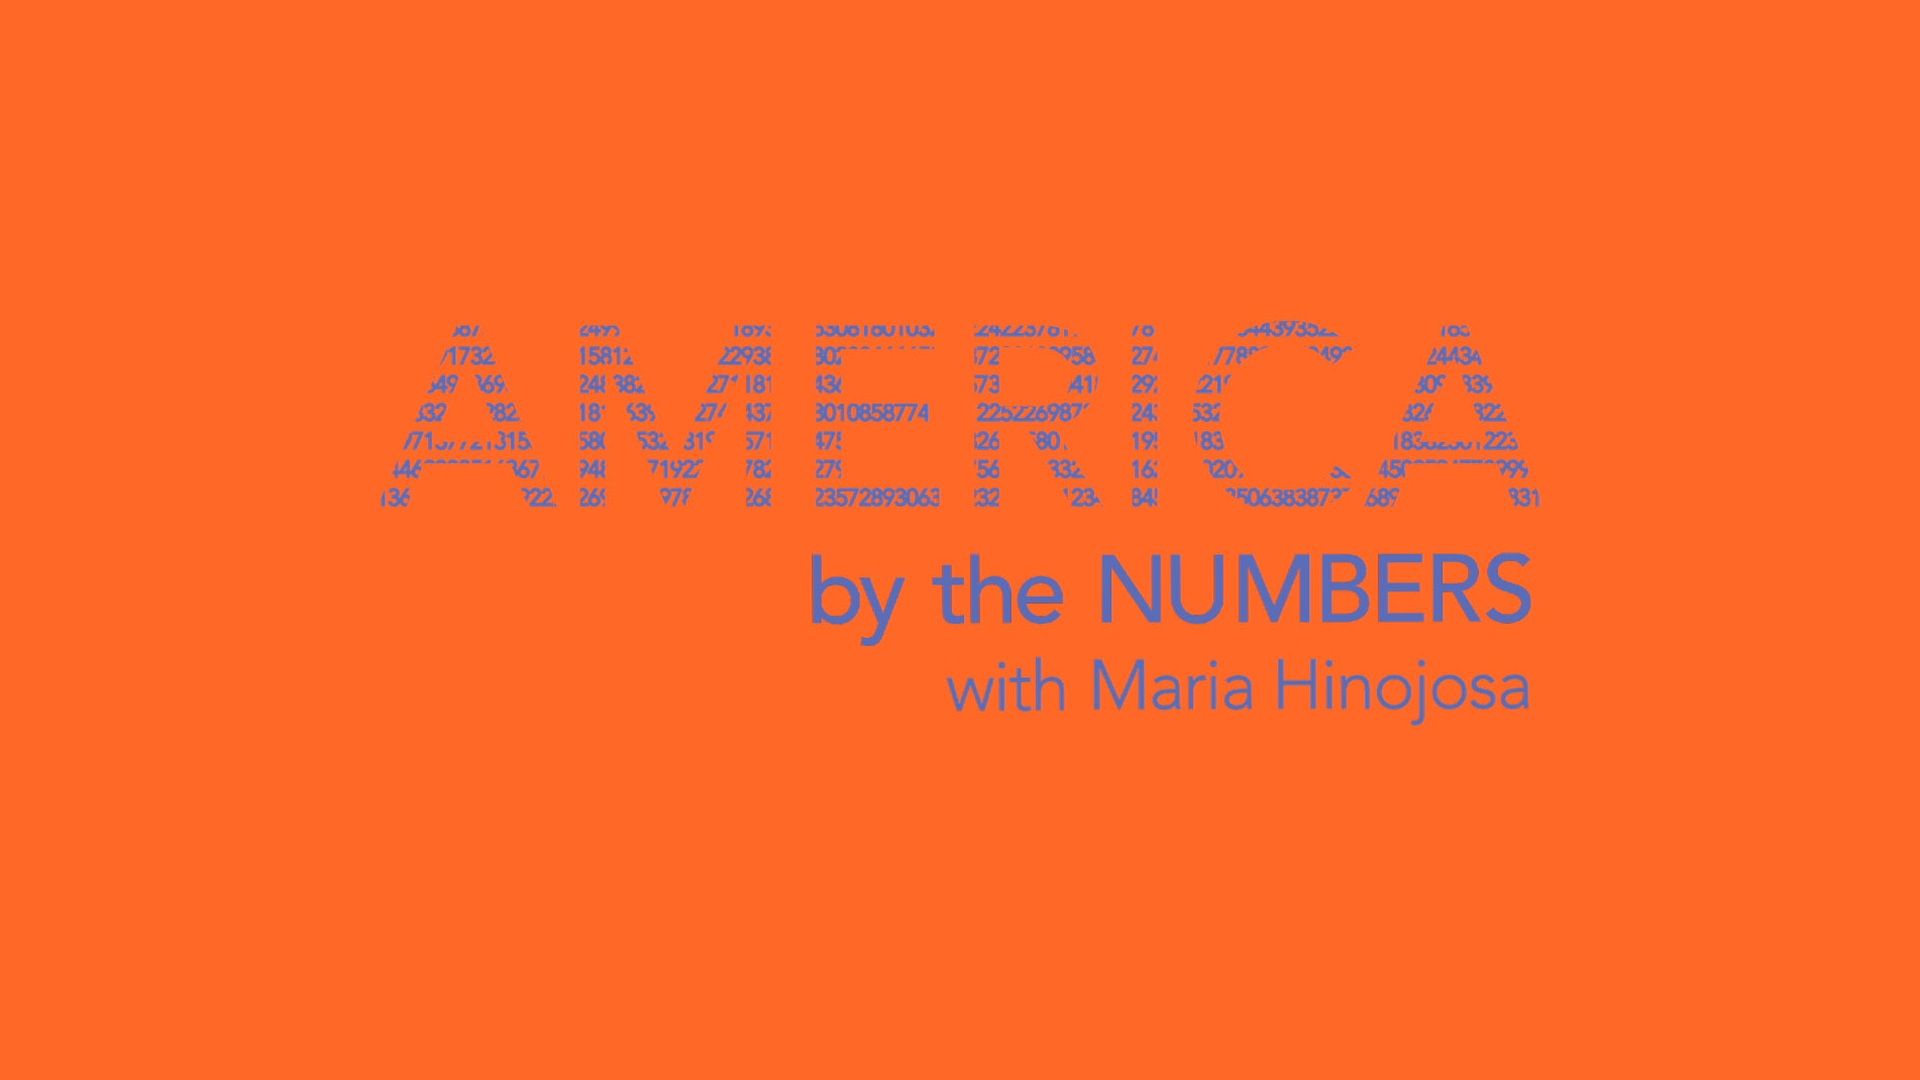 America by the Numbers with Maria Hinojosa Backdrop